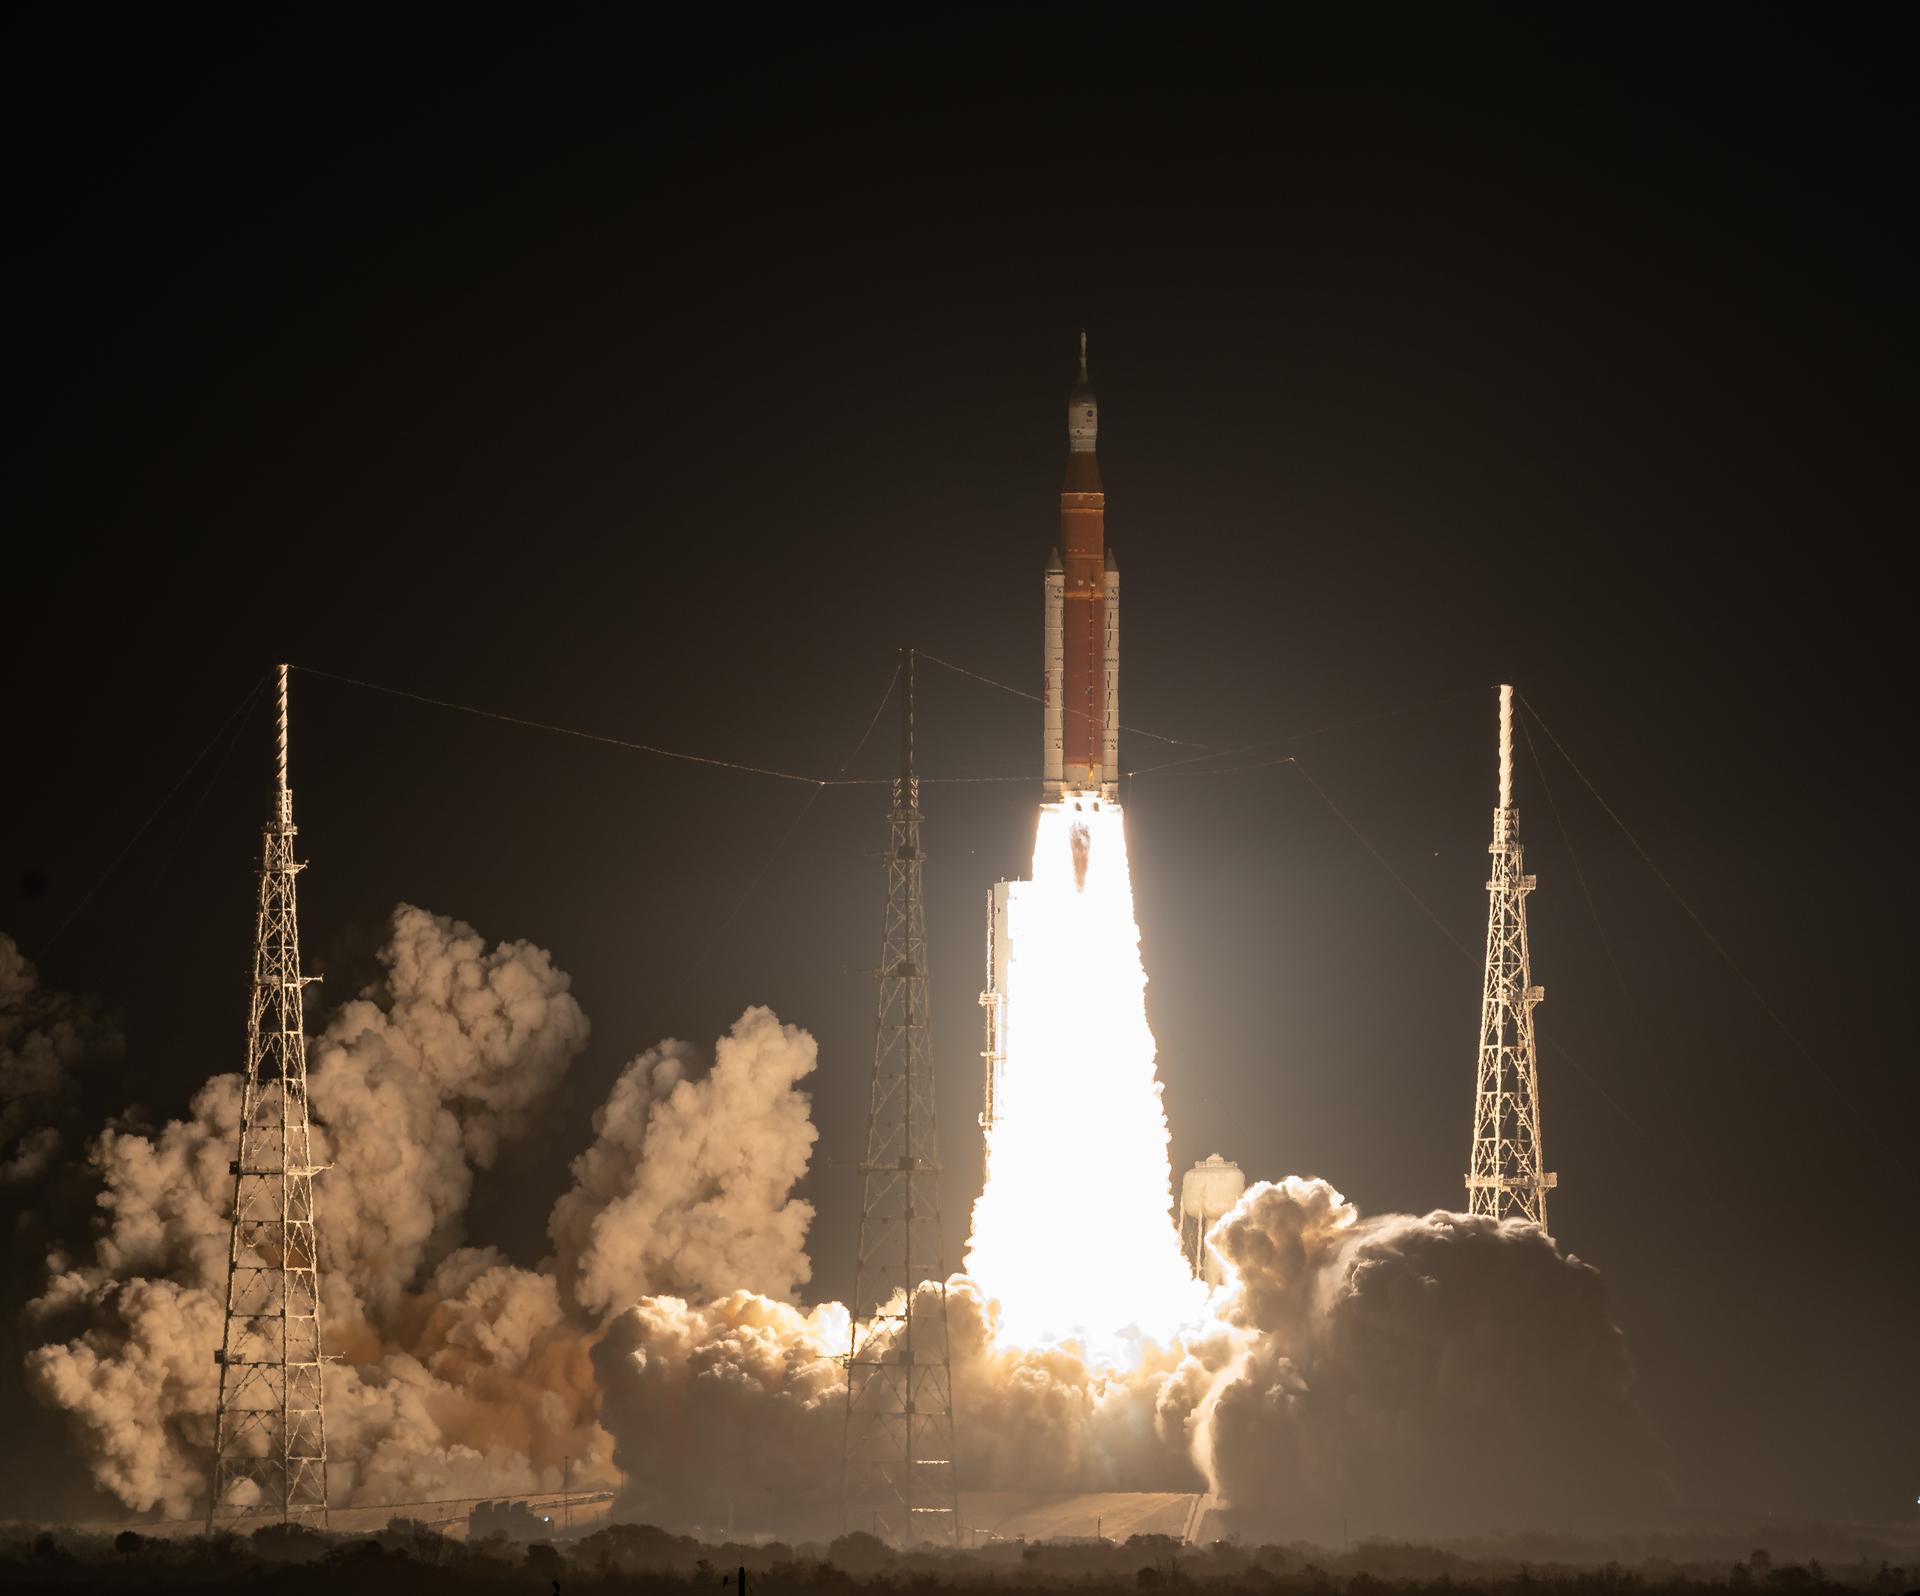 NASA's Artemis I mission lifts off from Kennedy Space Center